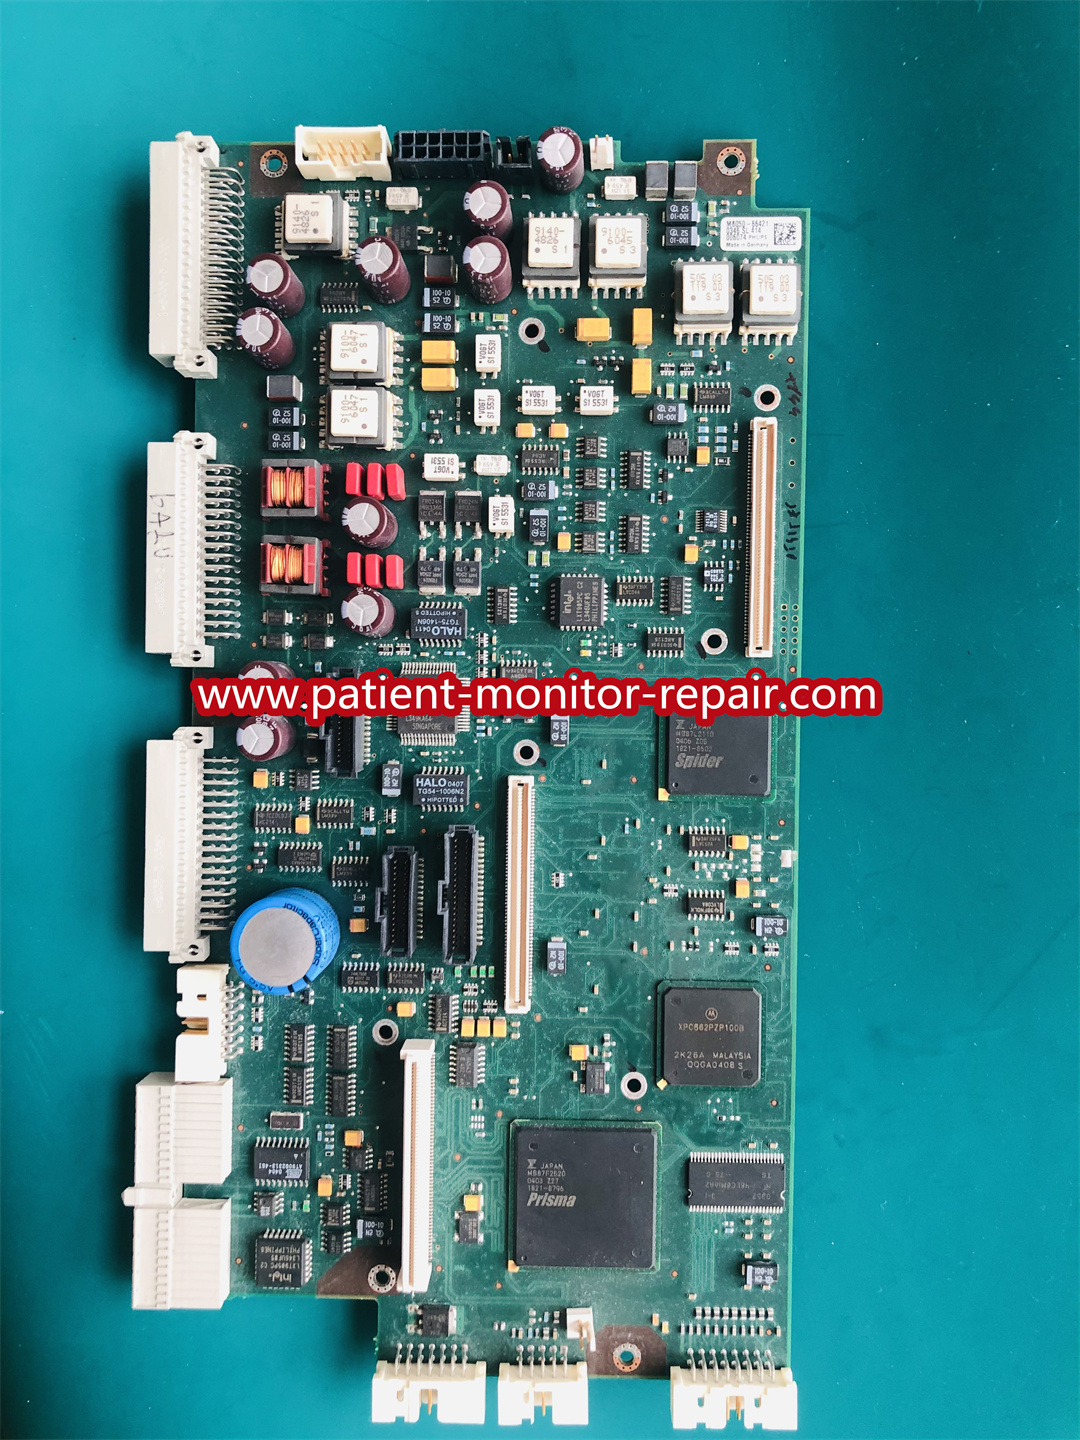 [Mainboard]PHILIPS MP70 patient monitor mainboard Price|Used|Refurbished